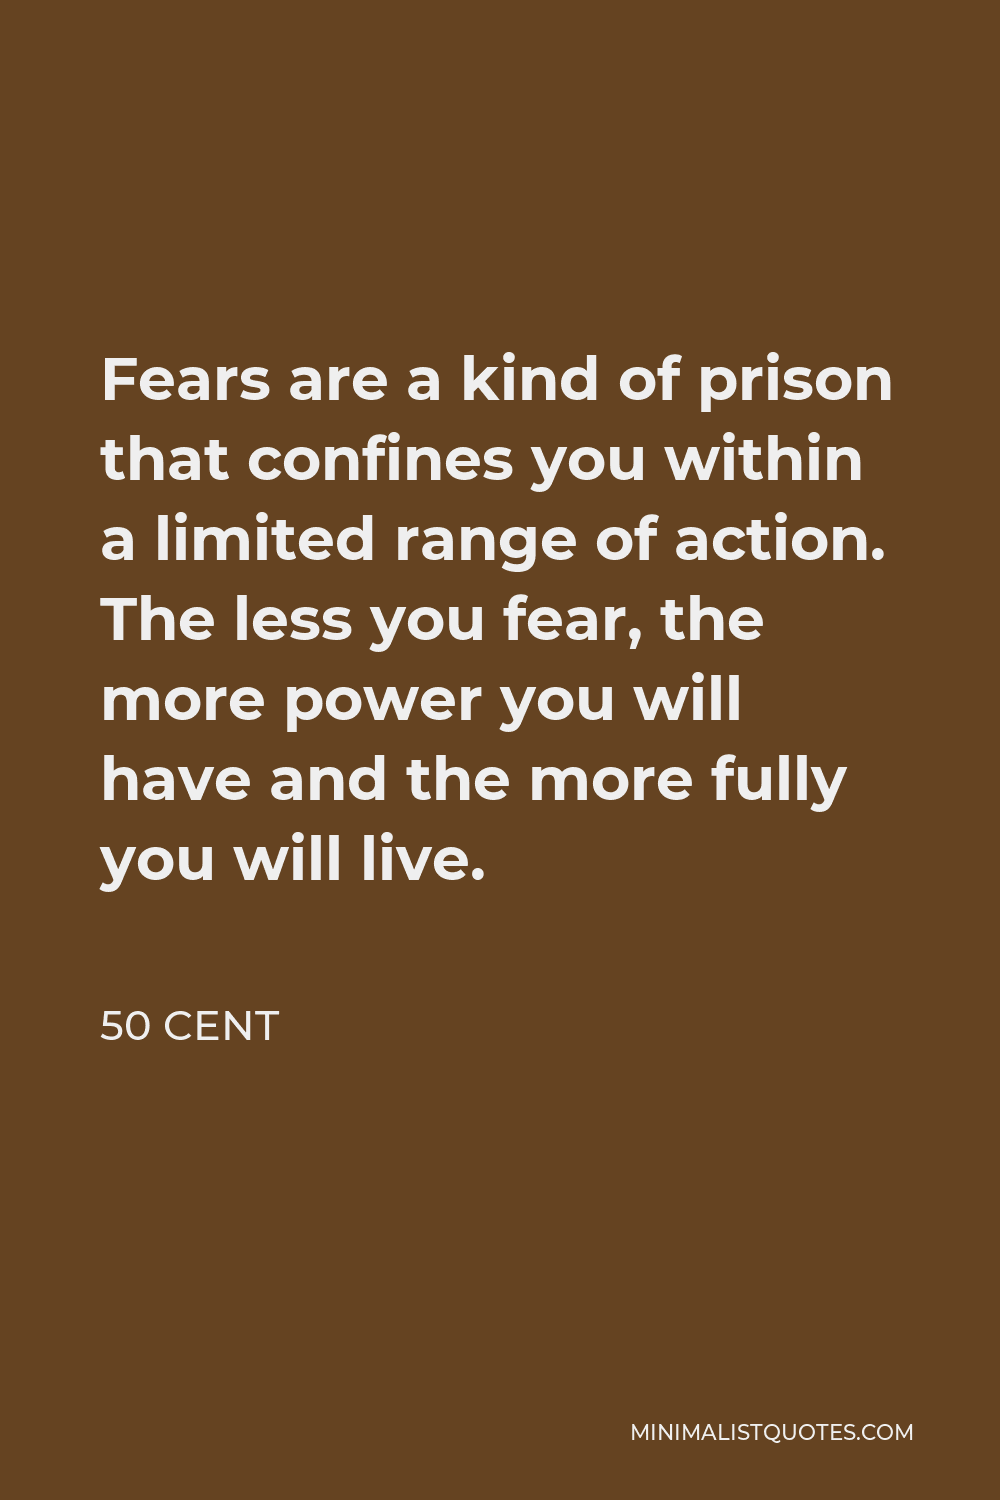 50 Cent Quote - Fears are a kind of prison that confines you within a limited range of action. The less you fear, the more power you will have and the more fully you will live.